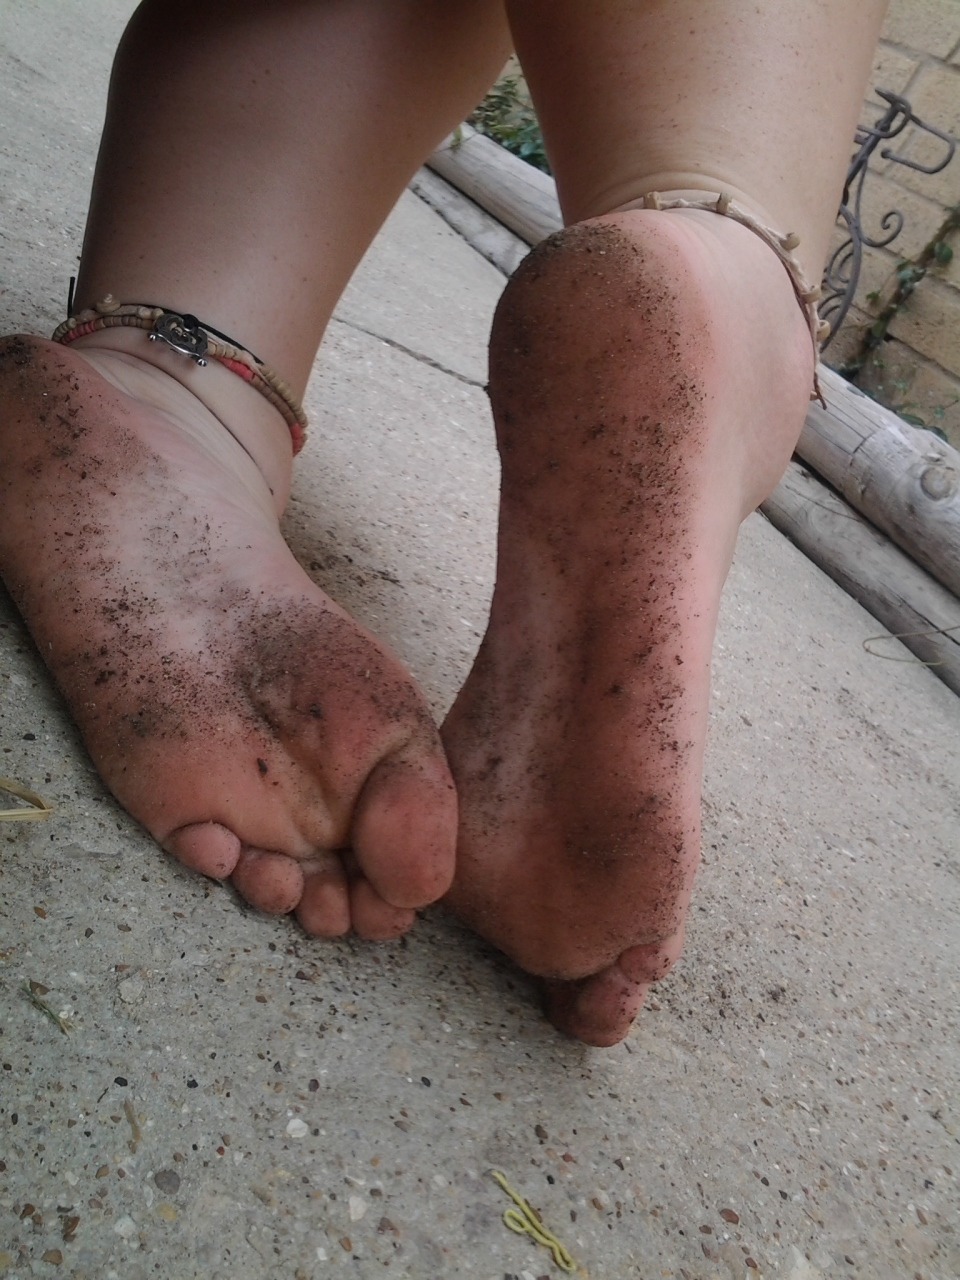 Fuckyeahdirtyfeet I Love Anklets And Dirty Fee